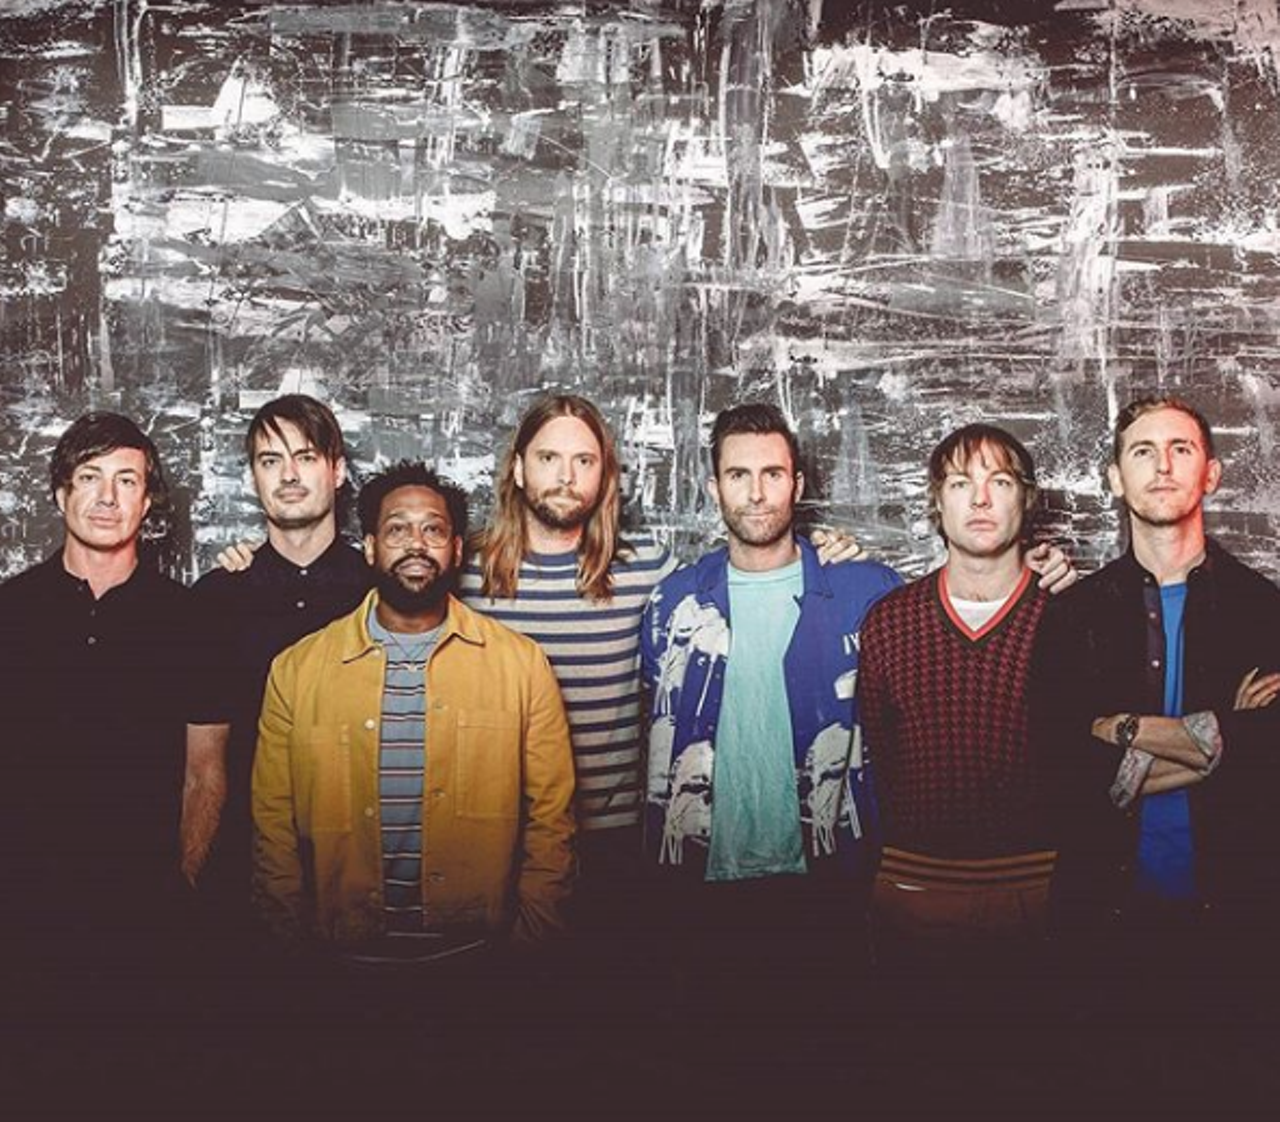 Maroon 5
$33+, Tue Jun 12, 7:30pm, AT&T Center, 1 AT&T Center Parkway, attcenter.com
Photo via Instagram / maroon5